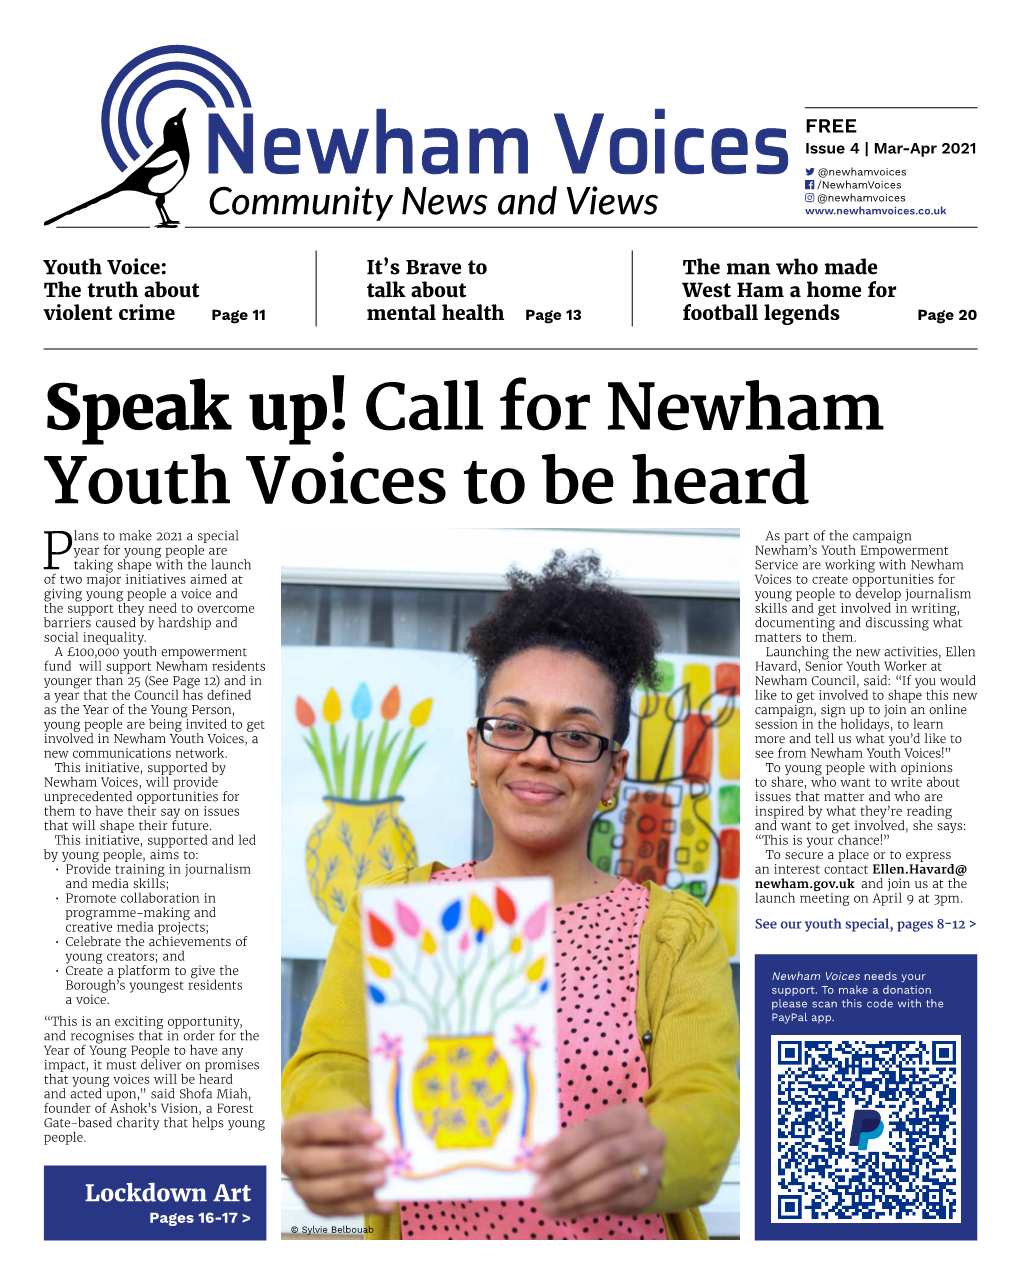 Speak Up! Call for Newham Youth Voices to Be Heard